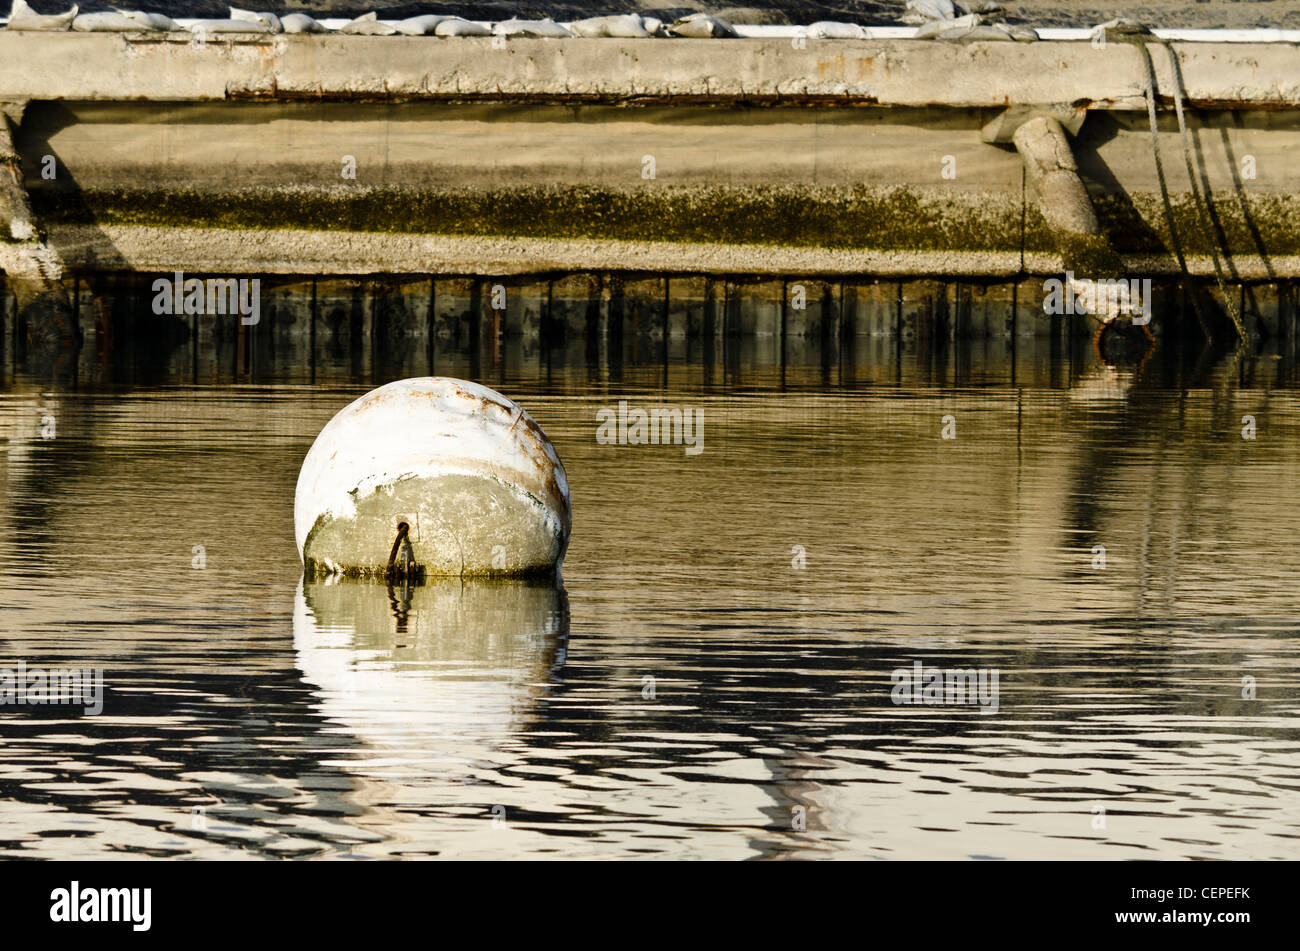 White buoy in the water with a seawall in the background Stock Photo